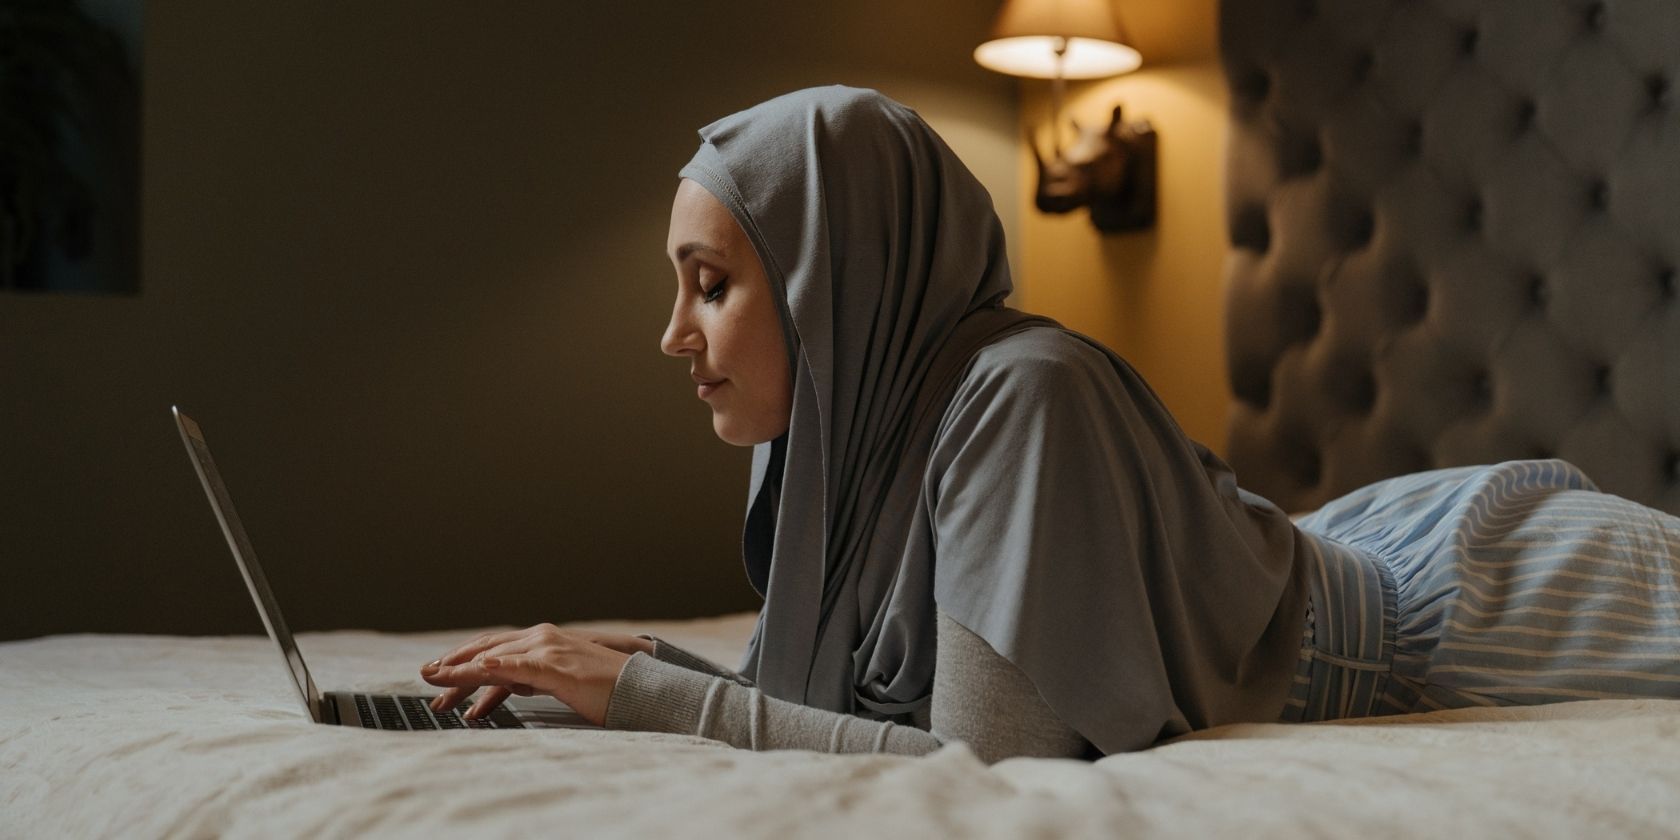 Woman in hijab on bed with laptop